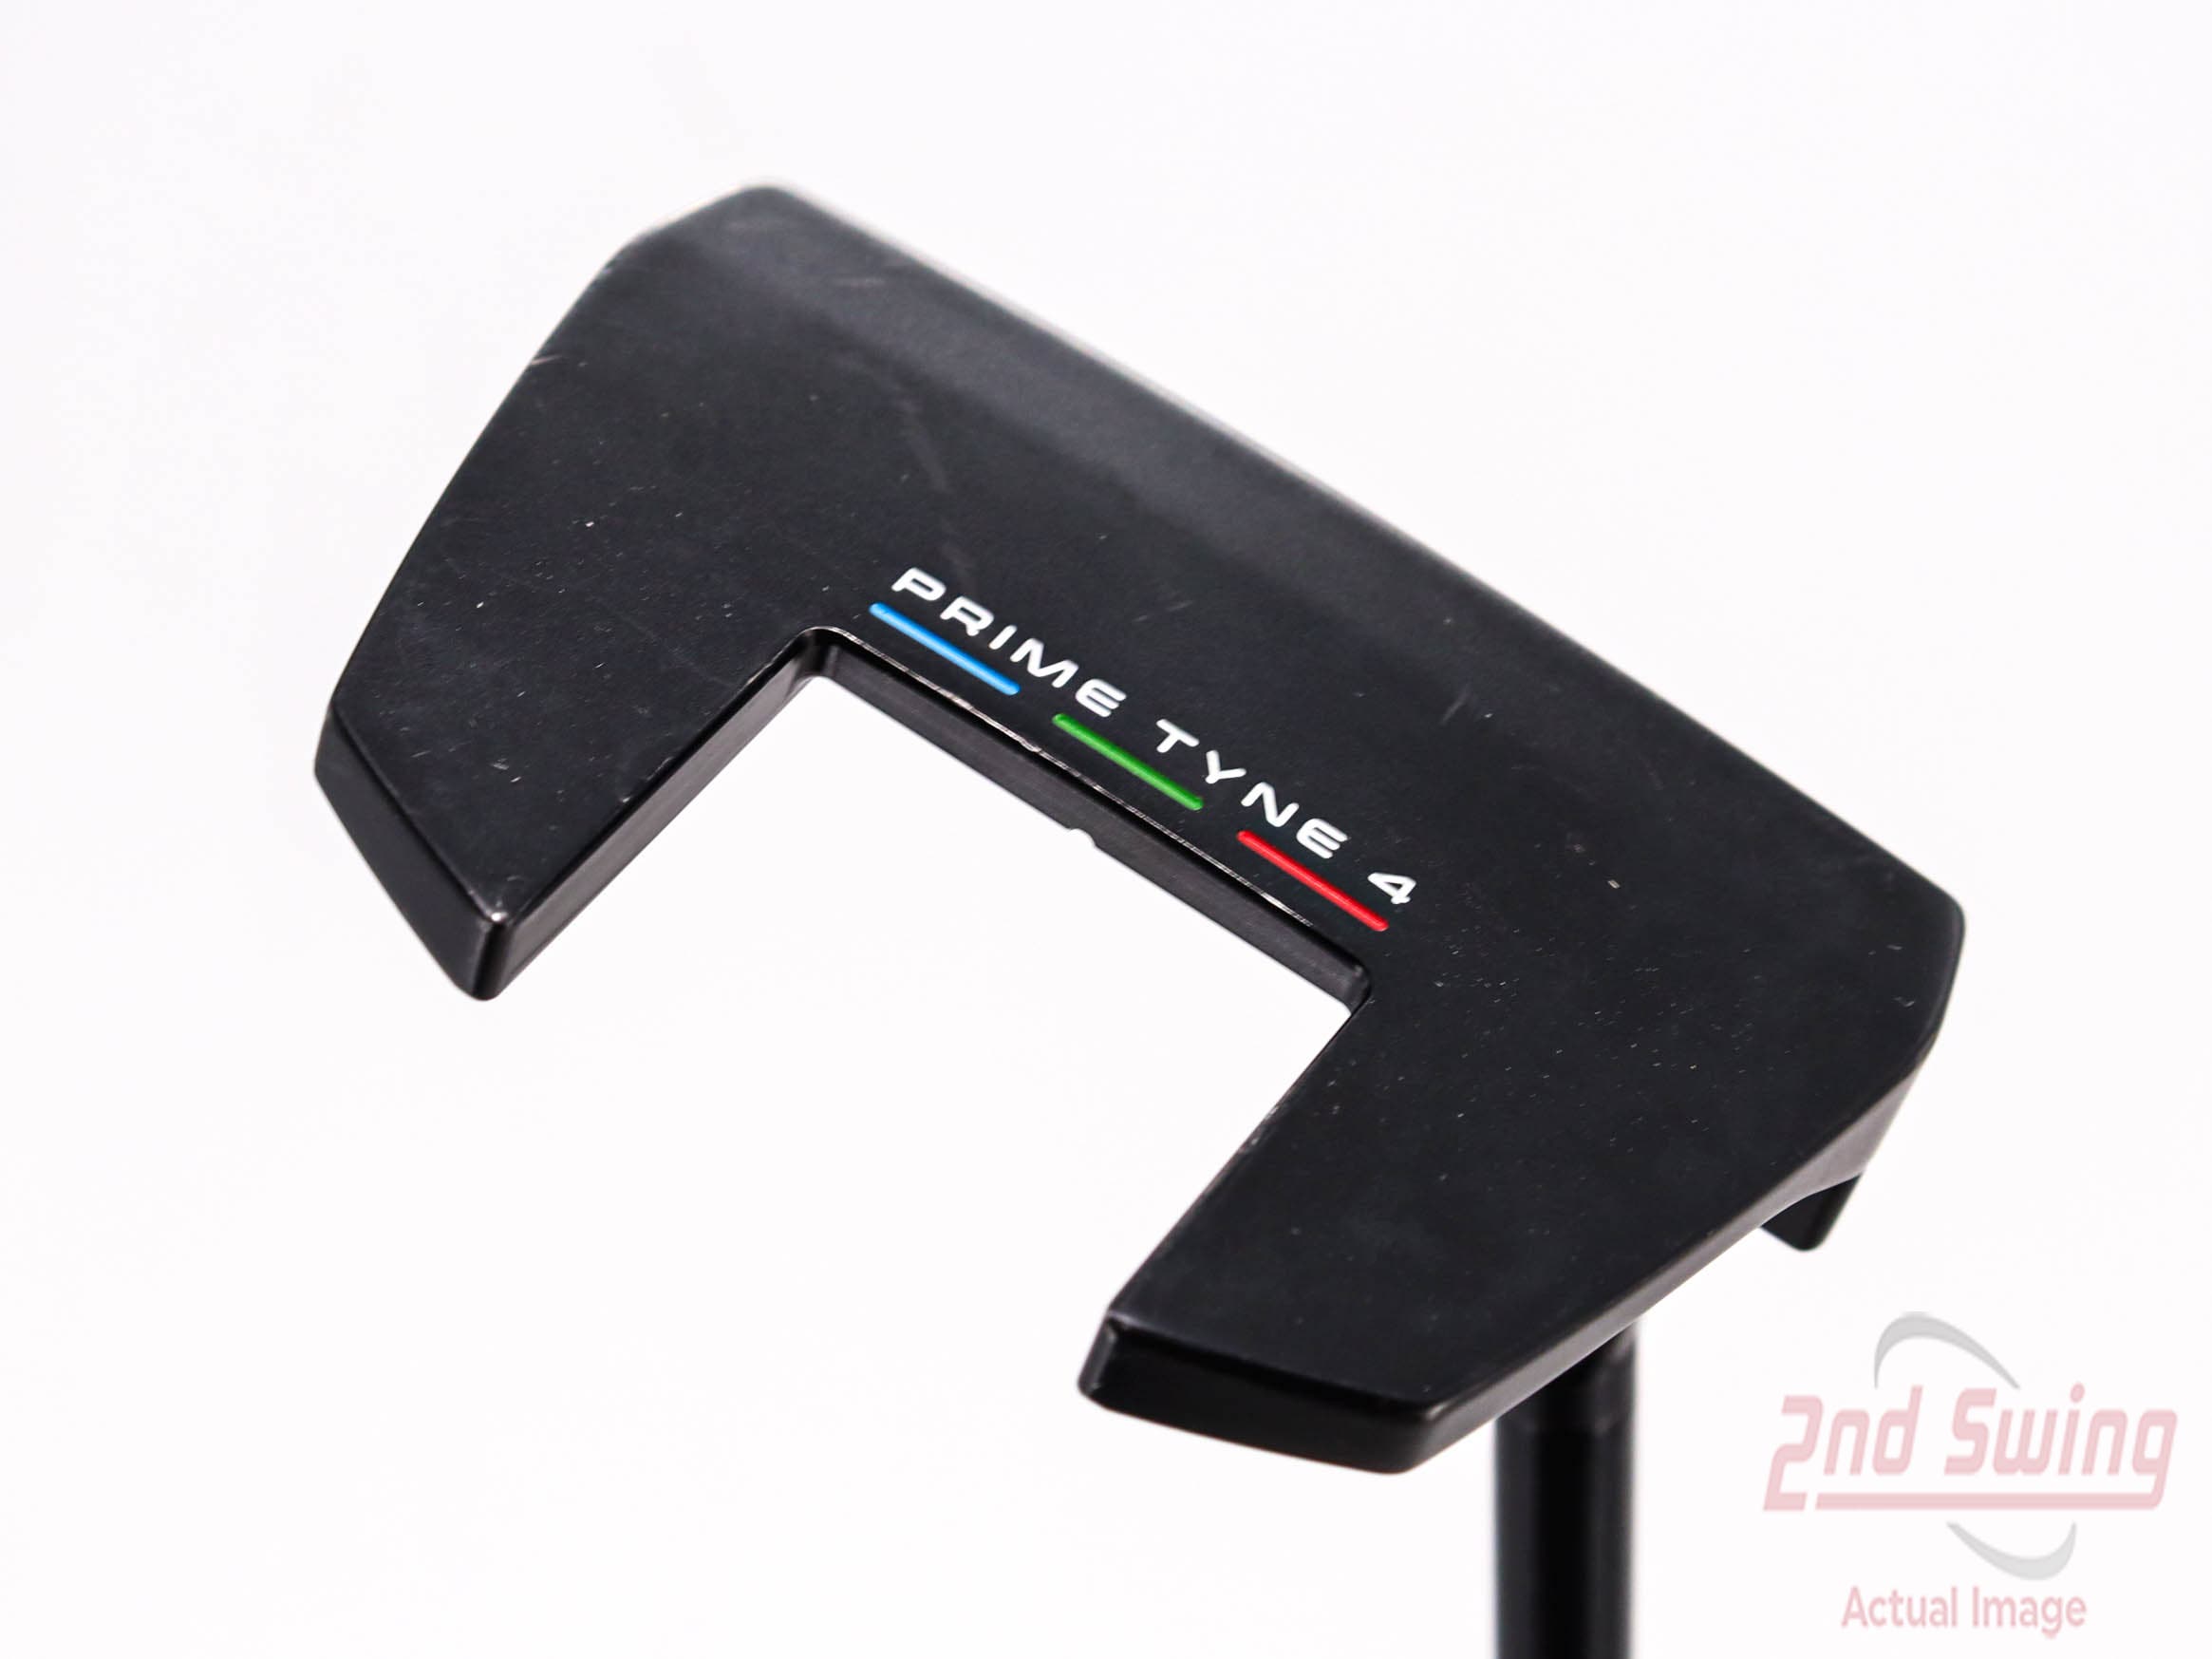 Ping PLD Milled Prime Tyne 4 Putter (D-42438027727)